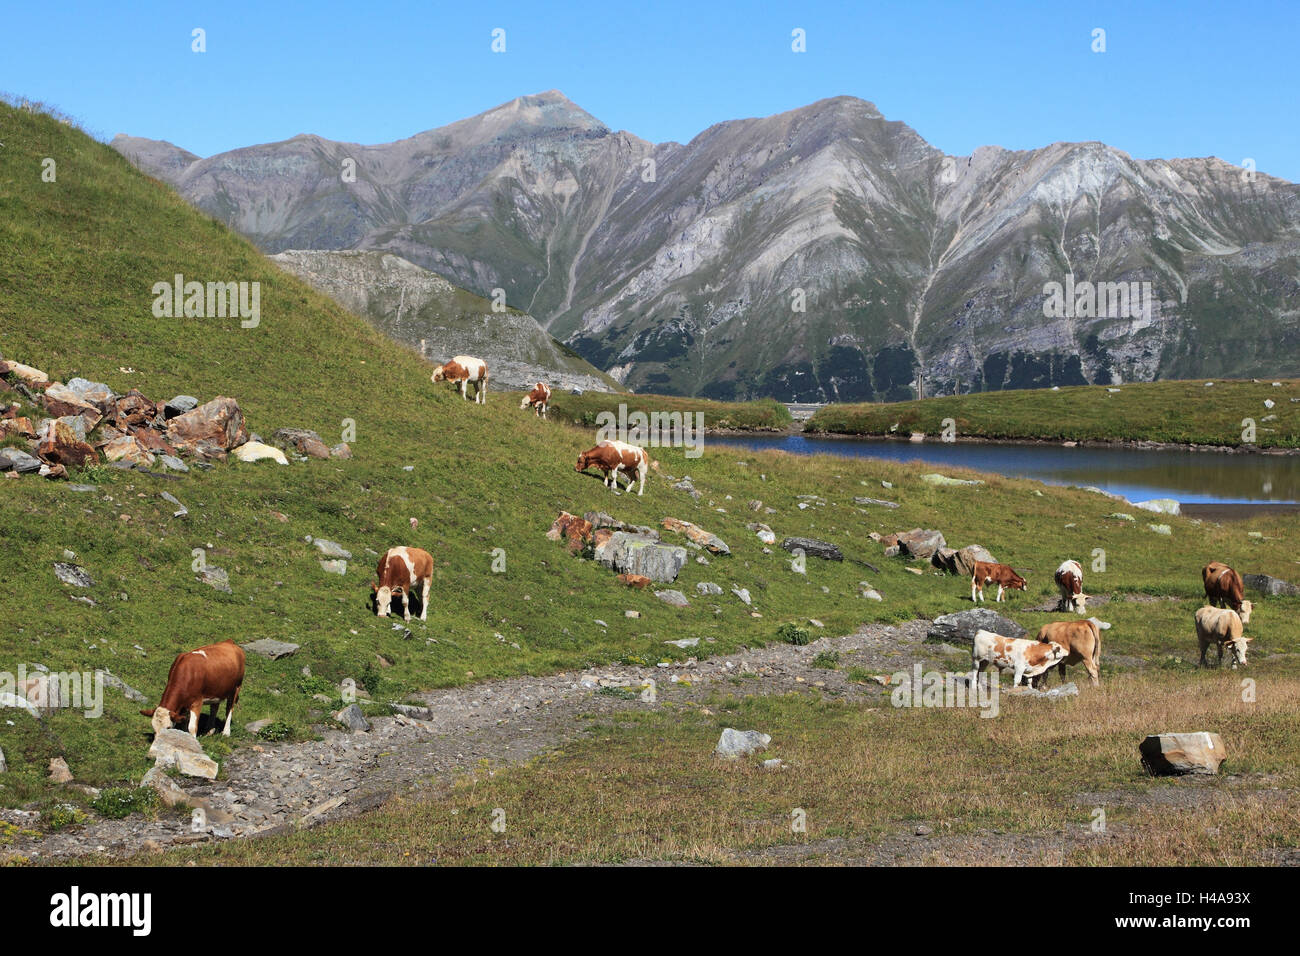 Of Pinzgauer cattles on the pasture, Stock Photo